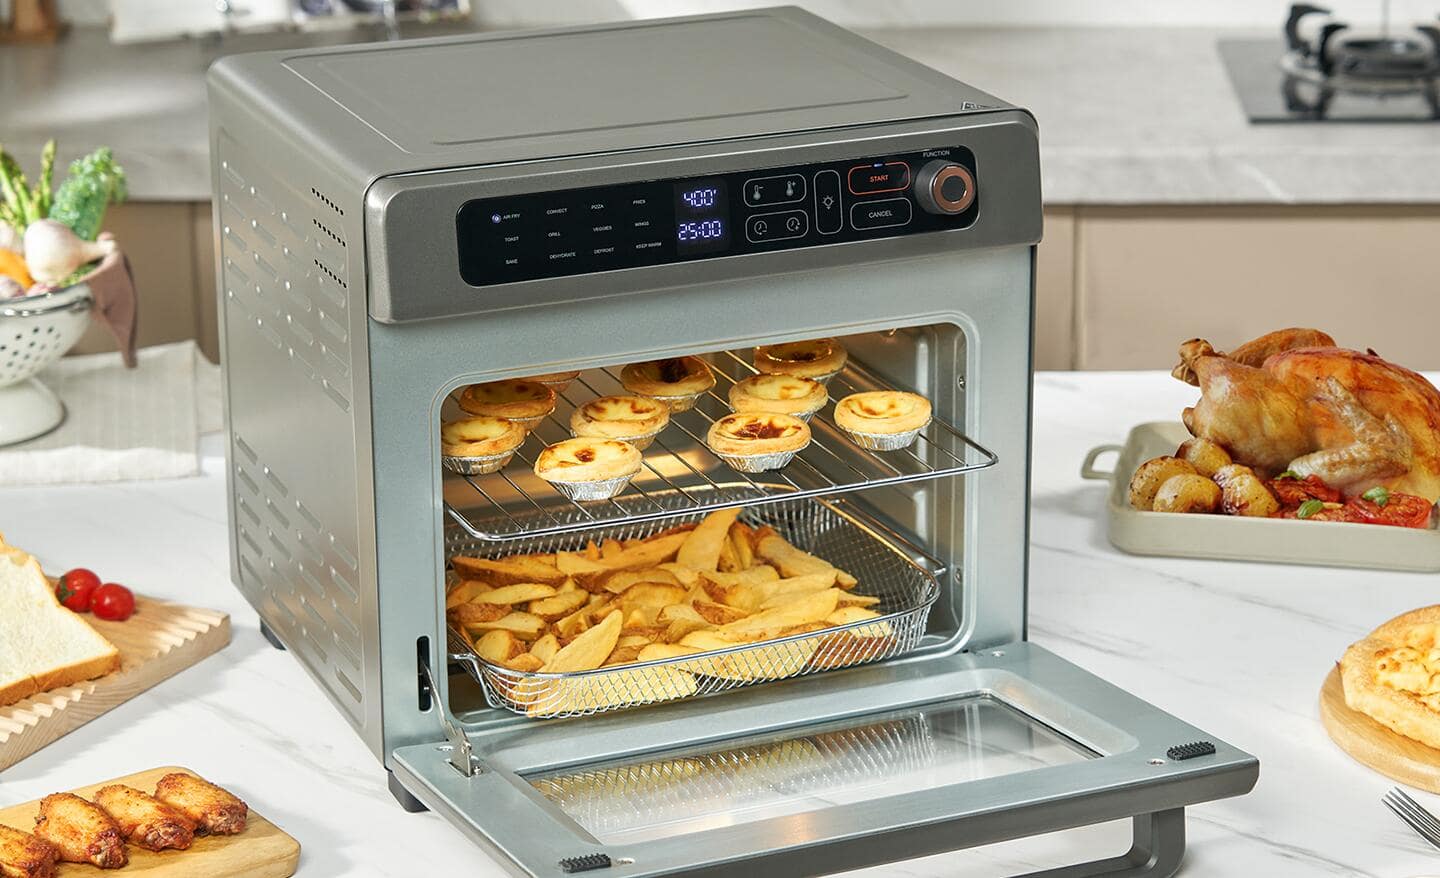 A stainless steel air fryer, toaster oven combination sits open on a counter with food on two racks inside.